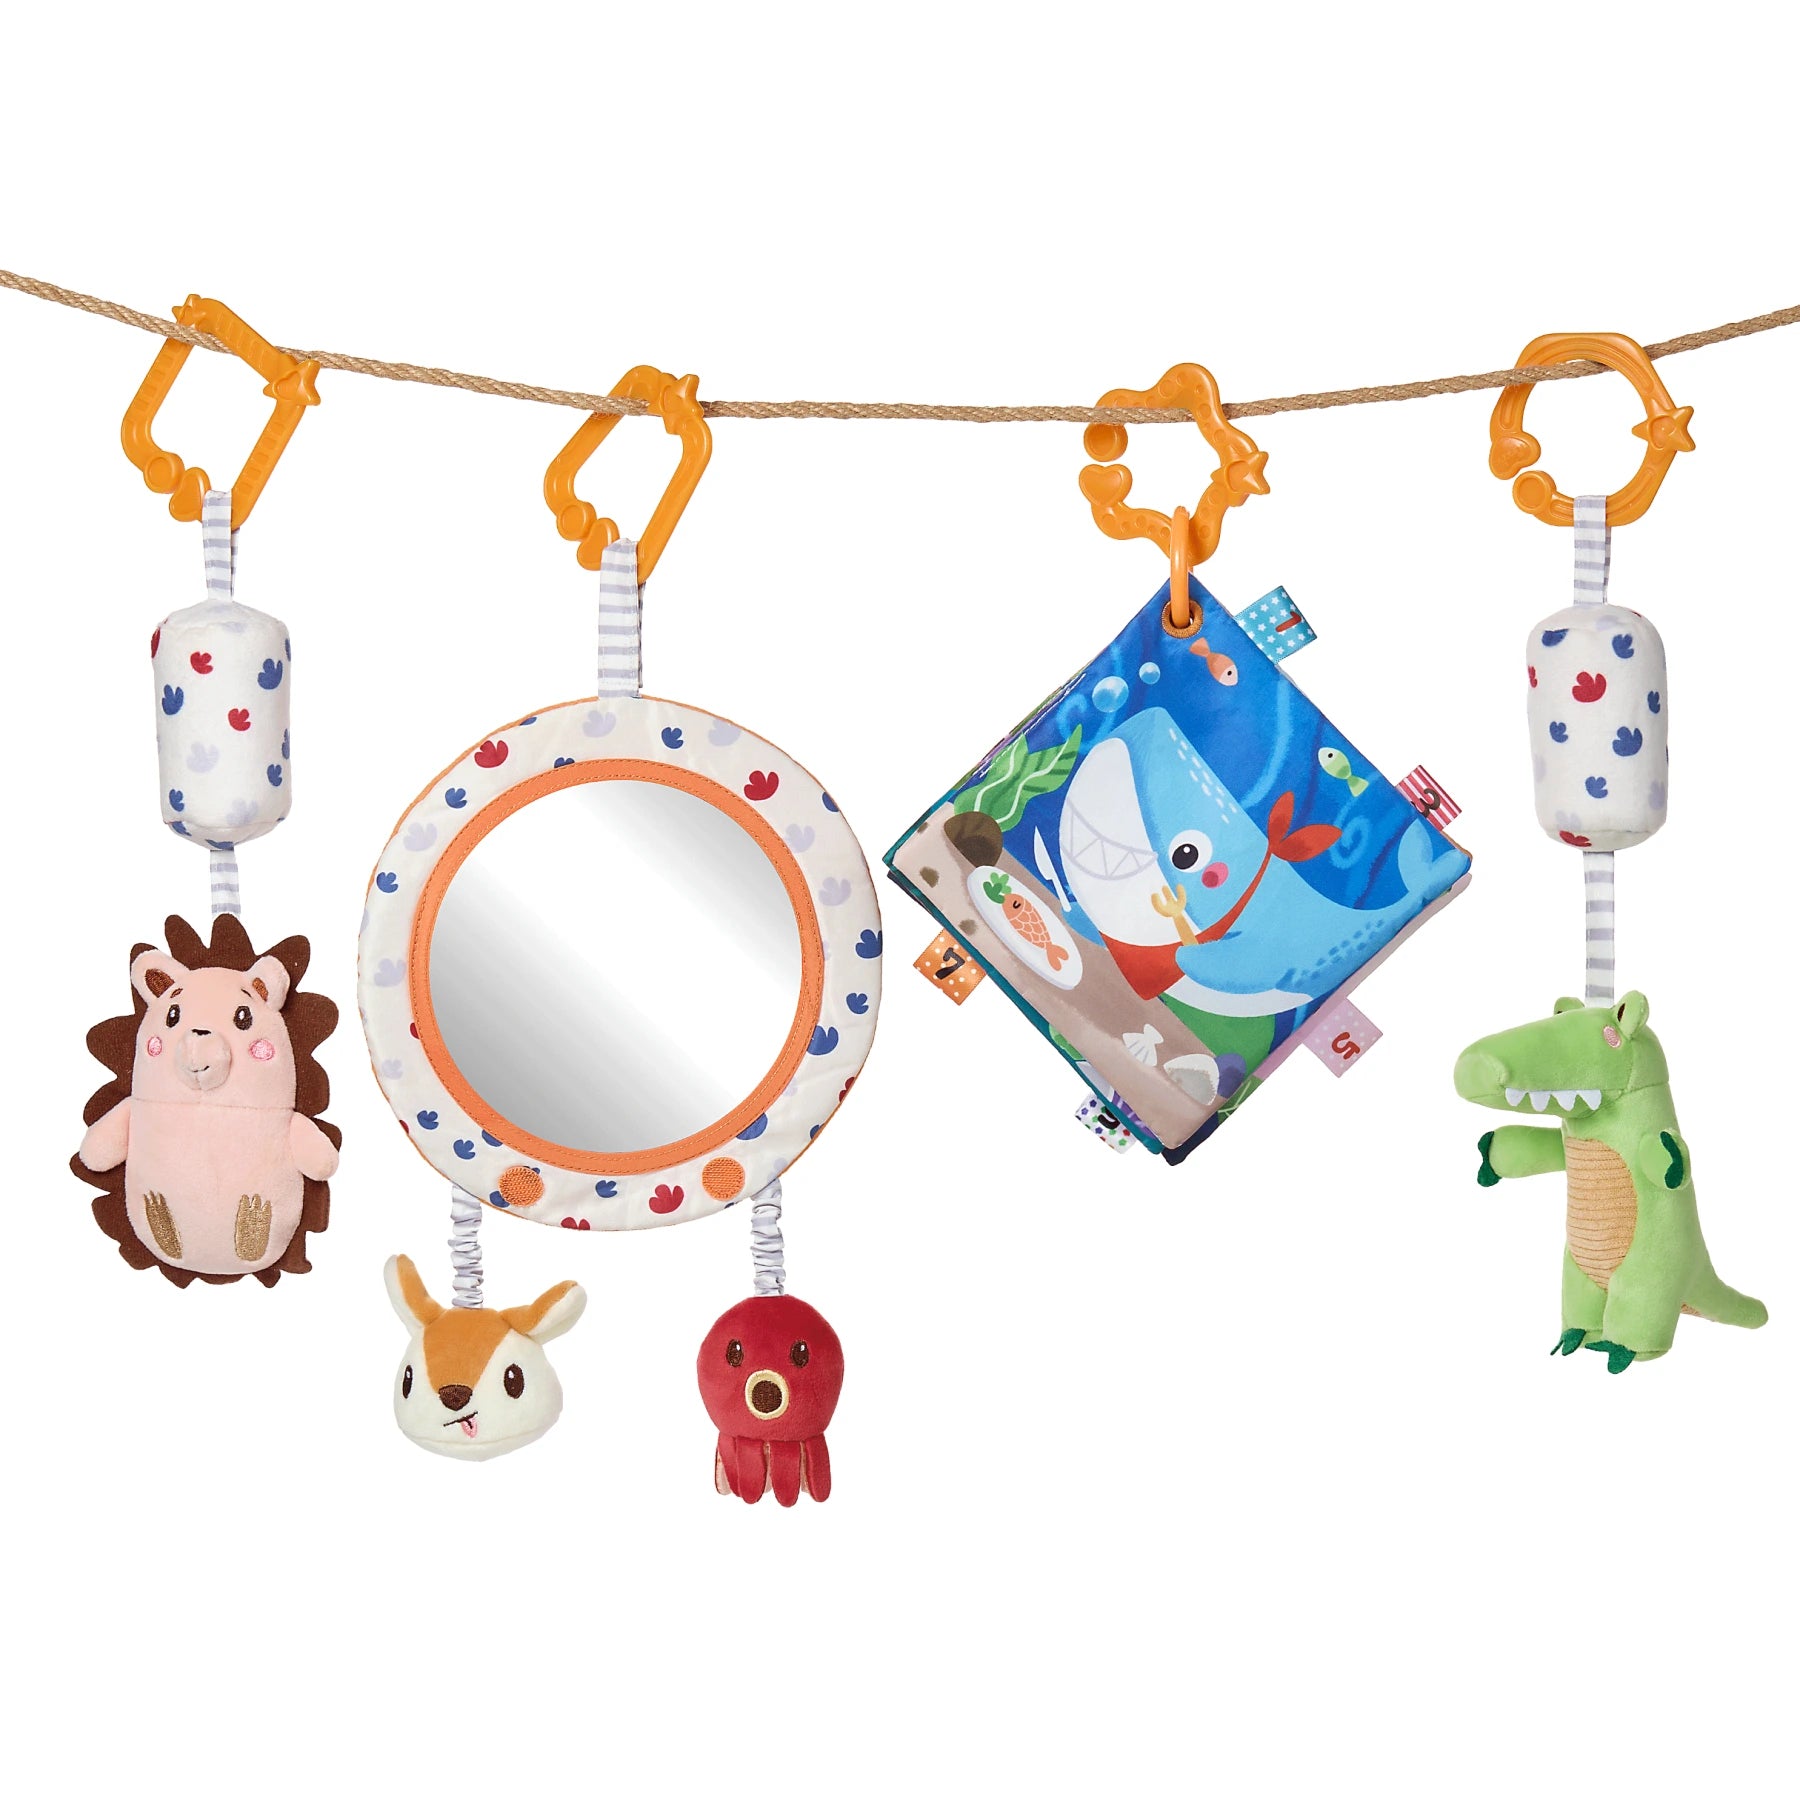 Baby toy set with tummy time mirror and plush rattle